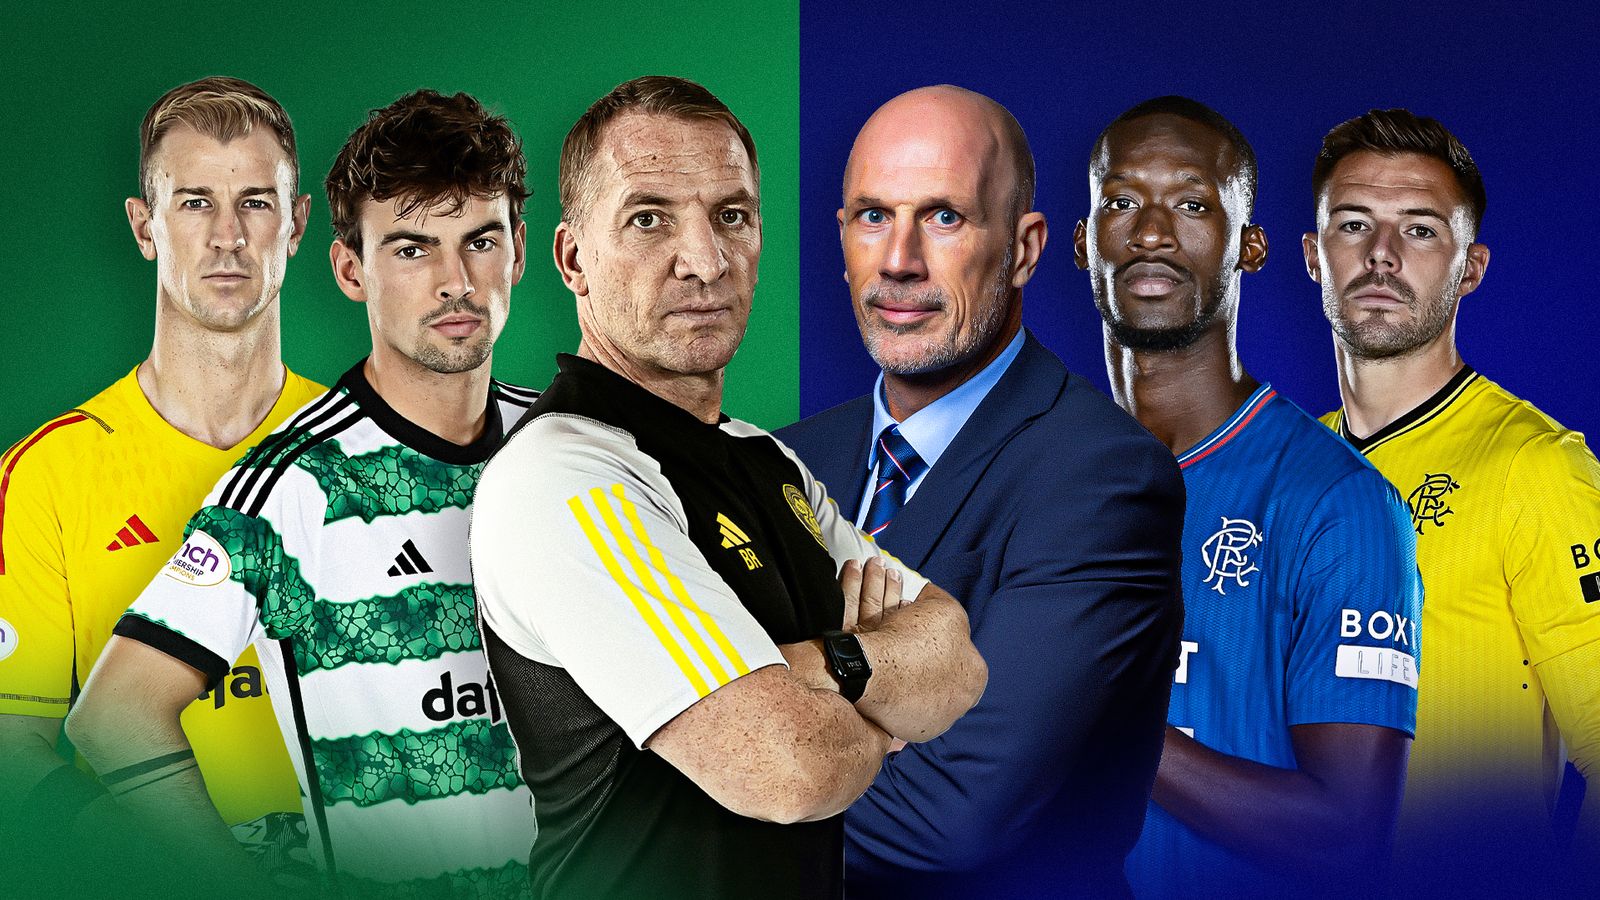 Celtic and Rangers go head-to-head on December 30 at Parkhead